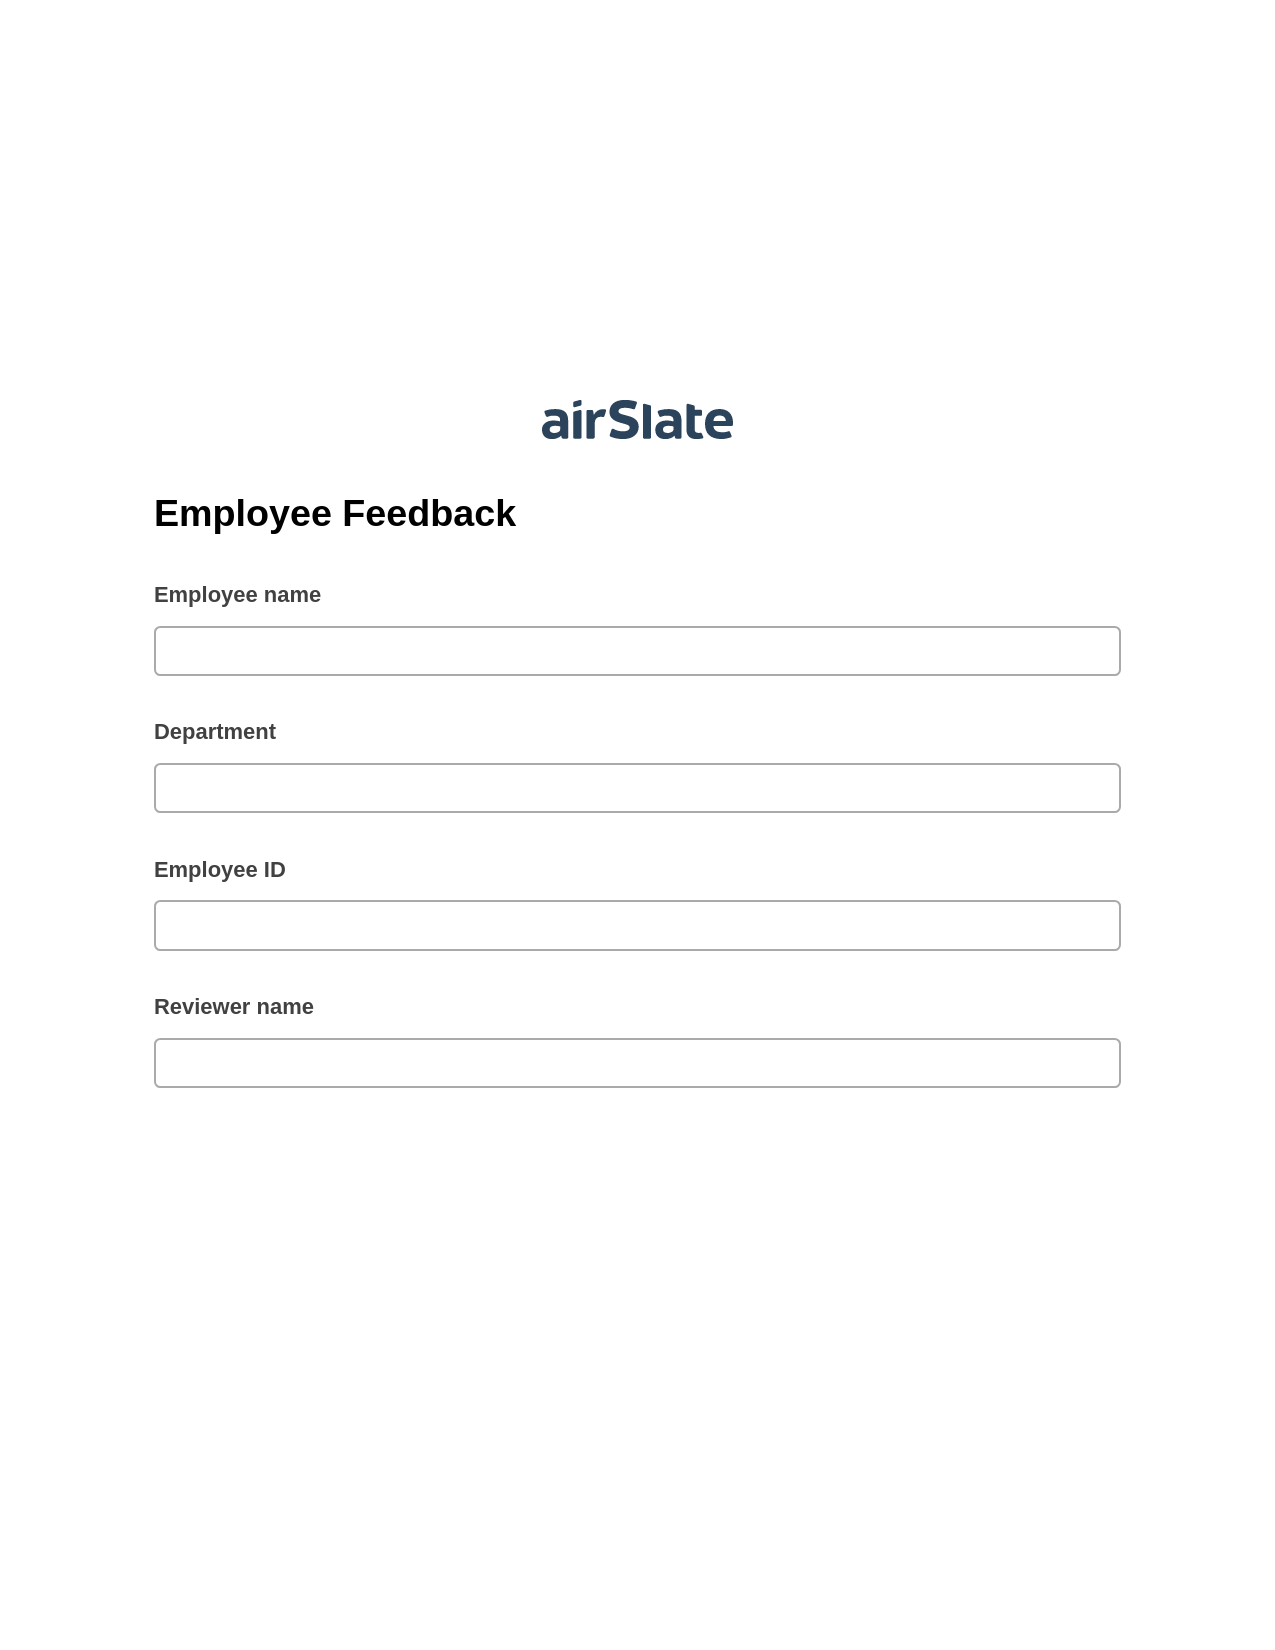 Multirole Employee Feedback Pre-fill from Salesforce Record Bot, System Bot - Create a Slate in another Flow, Export to Smartsheet